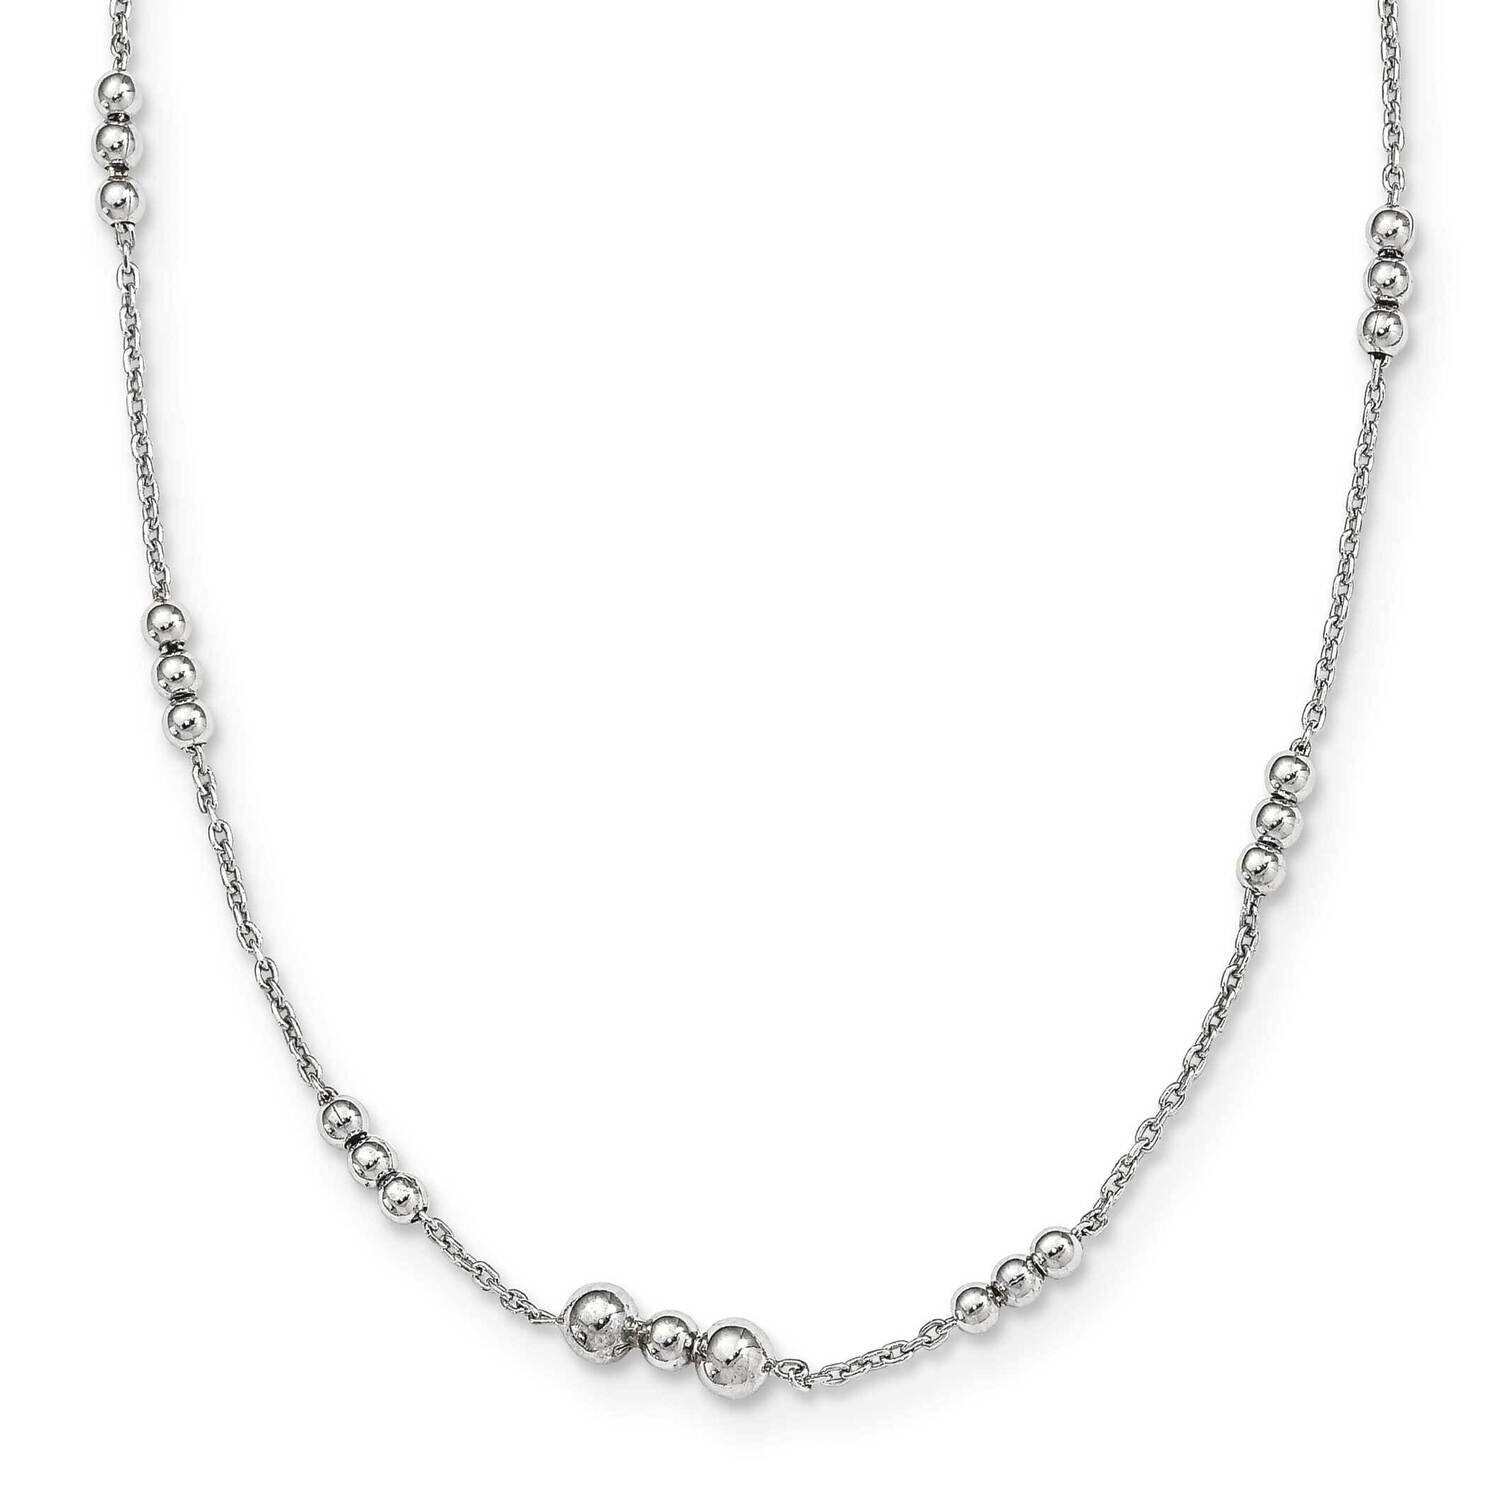 Beaded Necklace Sterling Silver Polished QG5581-36